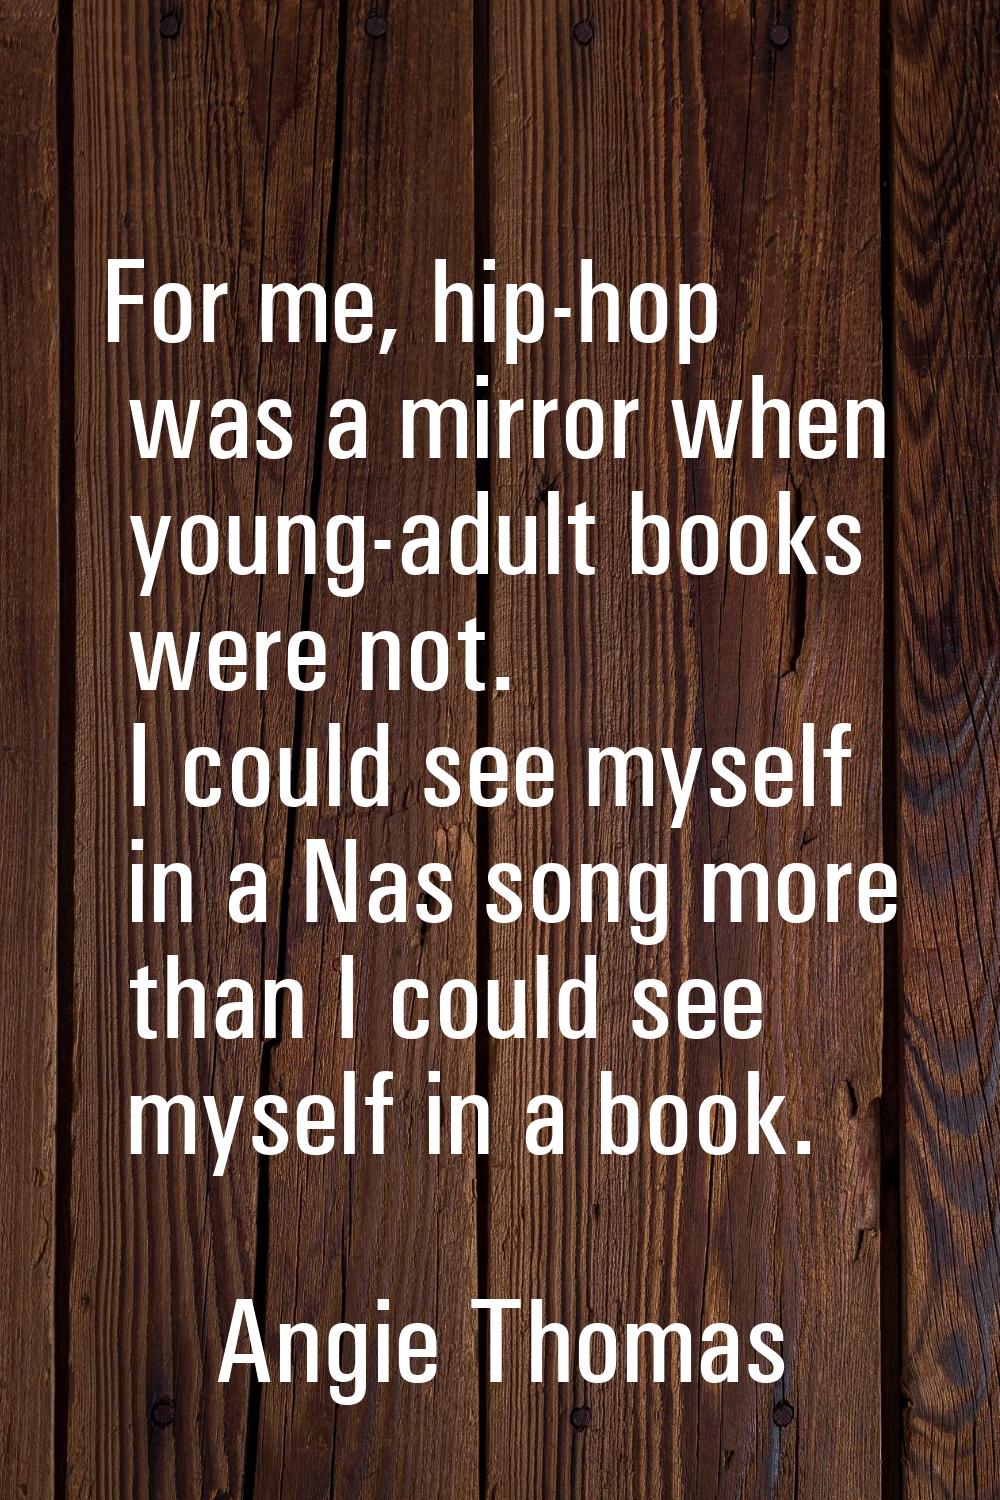 For me, hip-hop was a mirror when young-adult books were not. I could see myself in a Nas song more